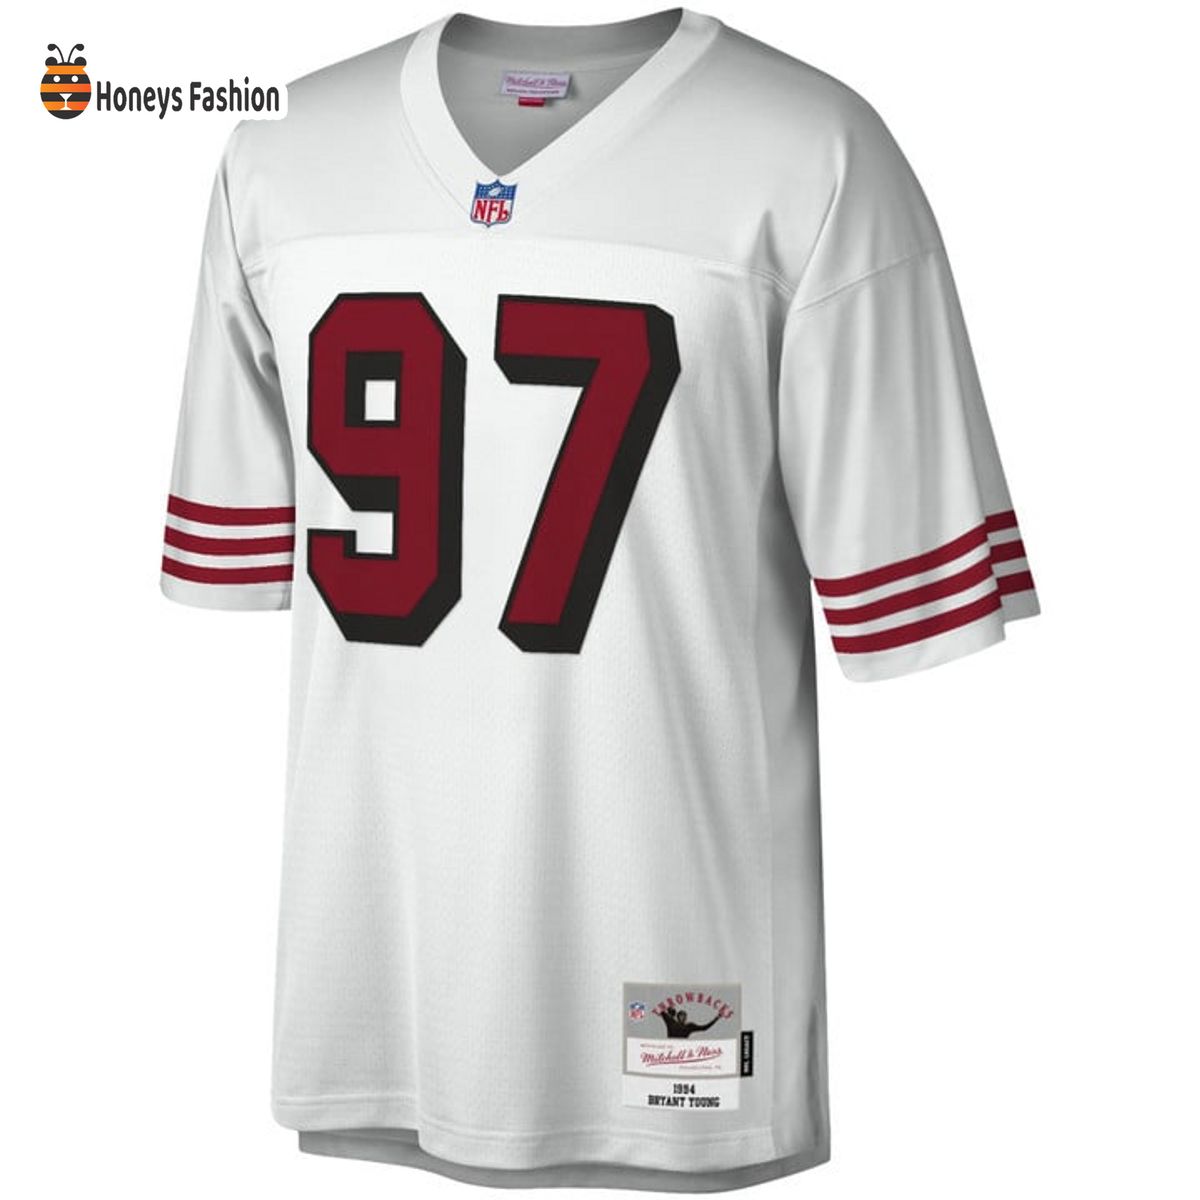 Bryant Young San Francisco 49ers Mitchell & Ness 1994 Legacy White Replica Jersey